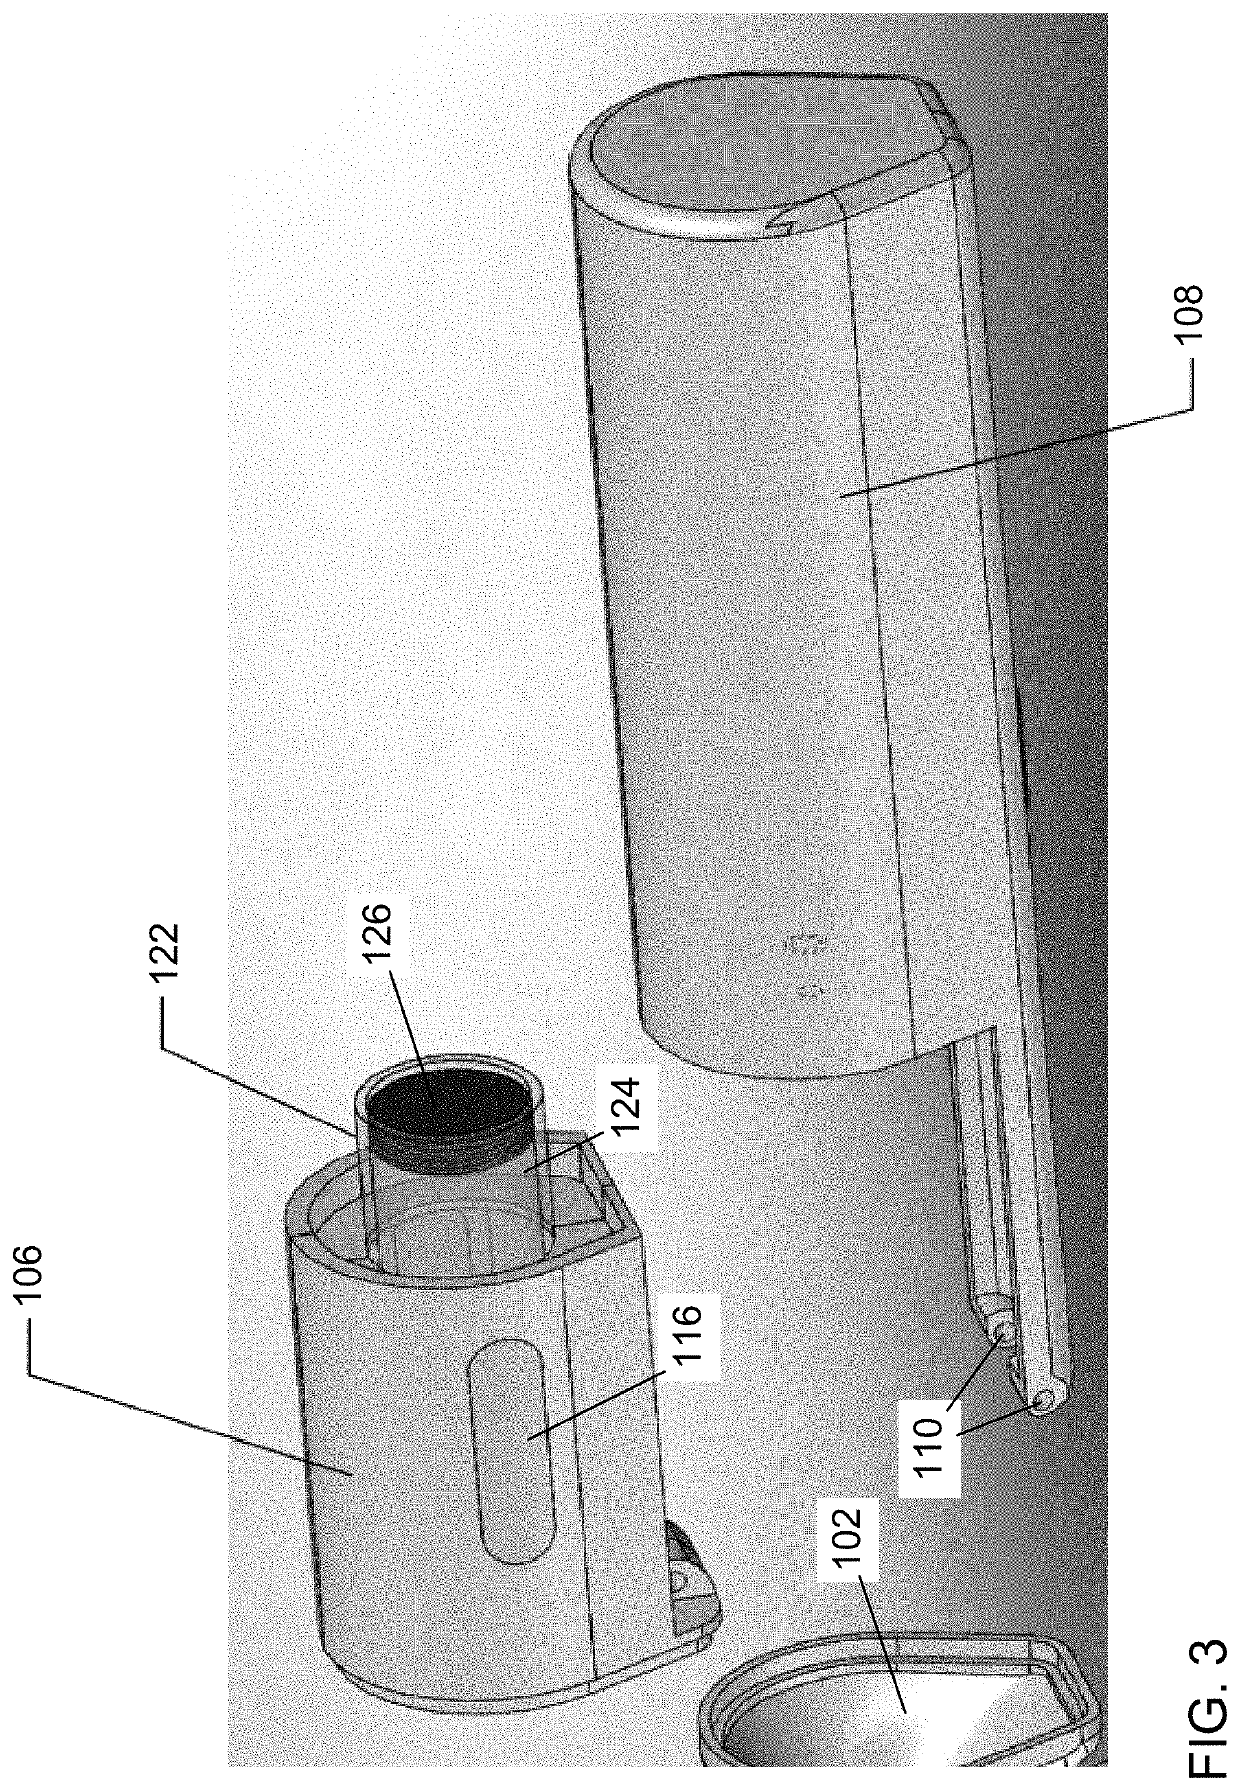 Apparatus for producing an aerosol for inhalation by a person